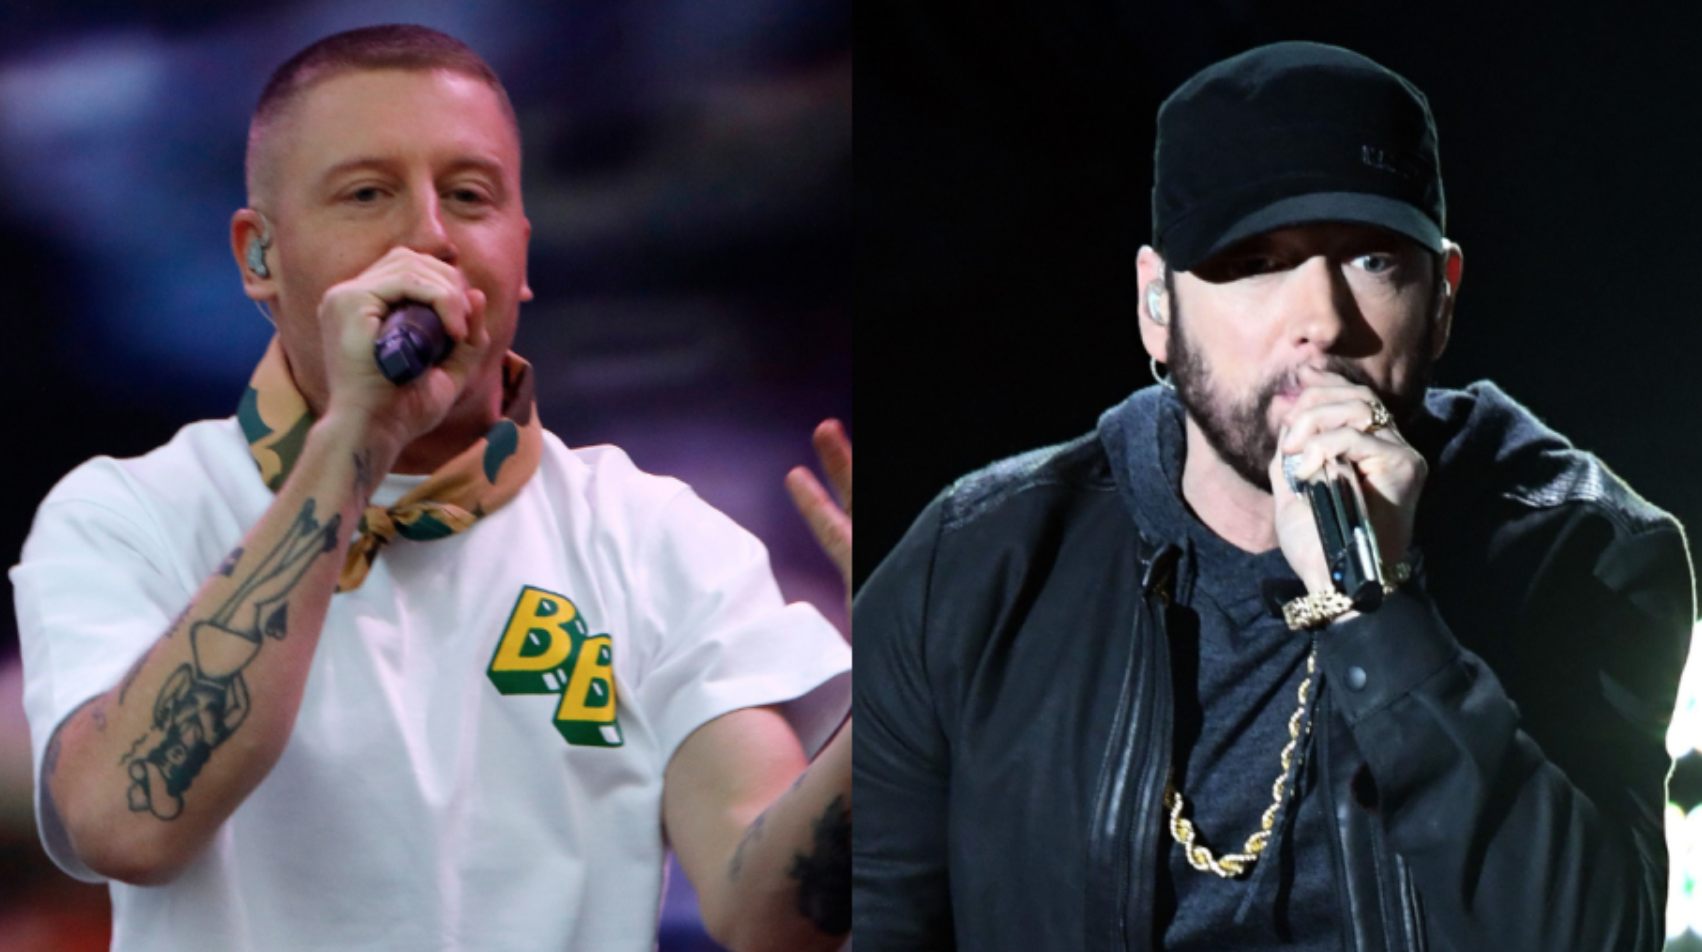 Macklemore Says He And Eminem Are “Guests” In Hip-Hop Culture